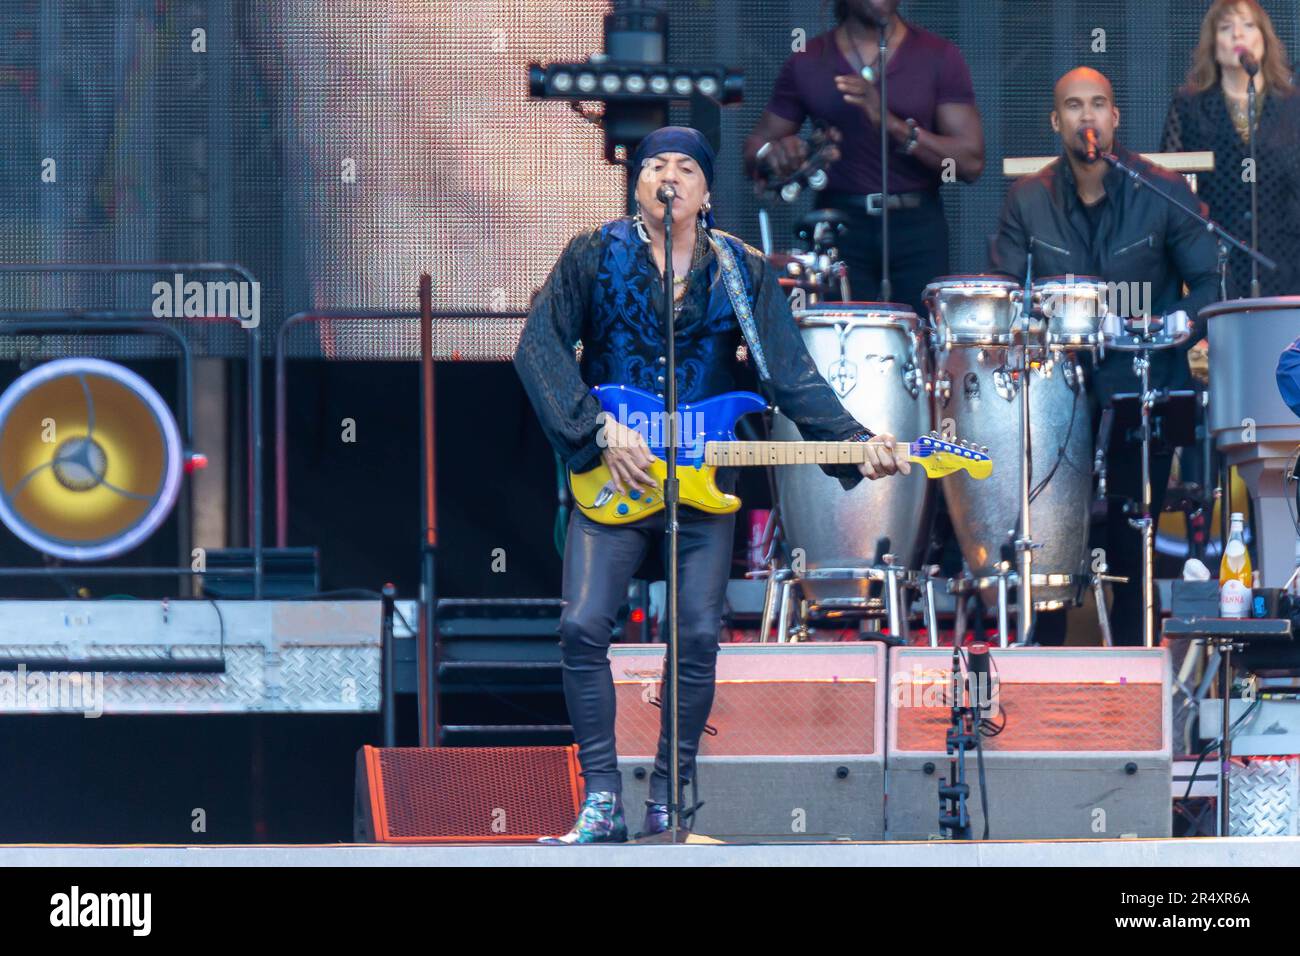 Edinburgh, Scotland. 30th May 2023. Bruce Springsteen and the E Street Band play Murrayfield Stadium on the first UK show of his current World Tour. Steven van Zandt showing support for Ukraine with his colored guitar. Credit: Tim J. Gray/Alamy Live News Stock Photo